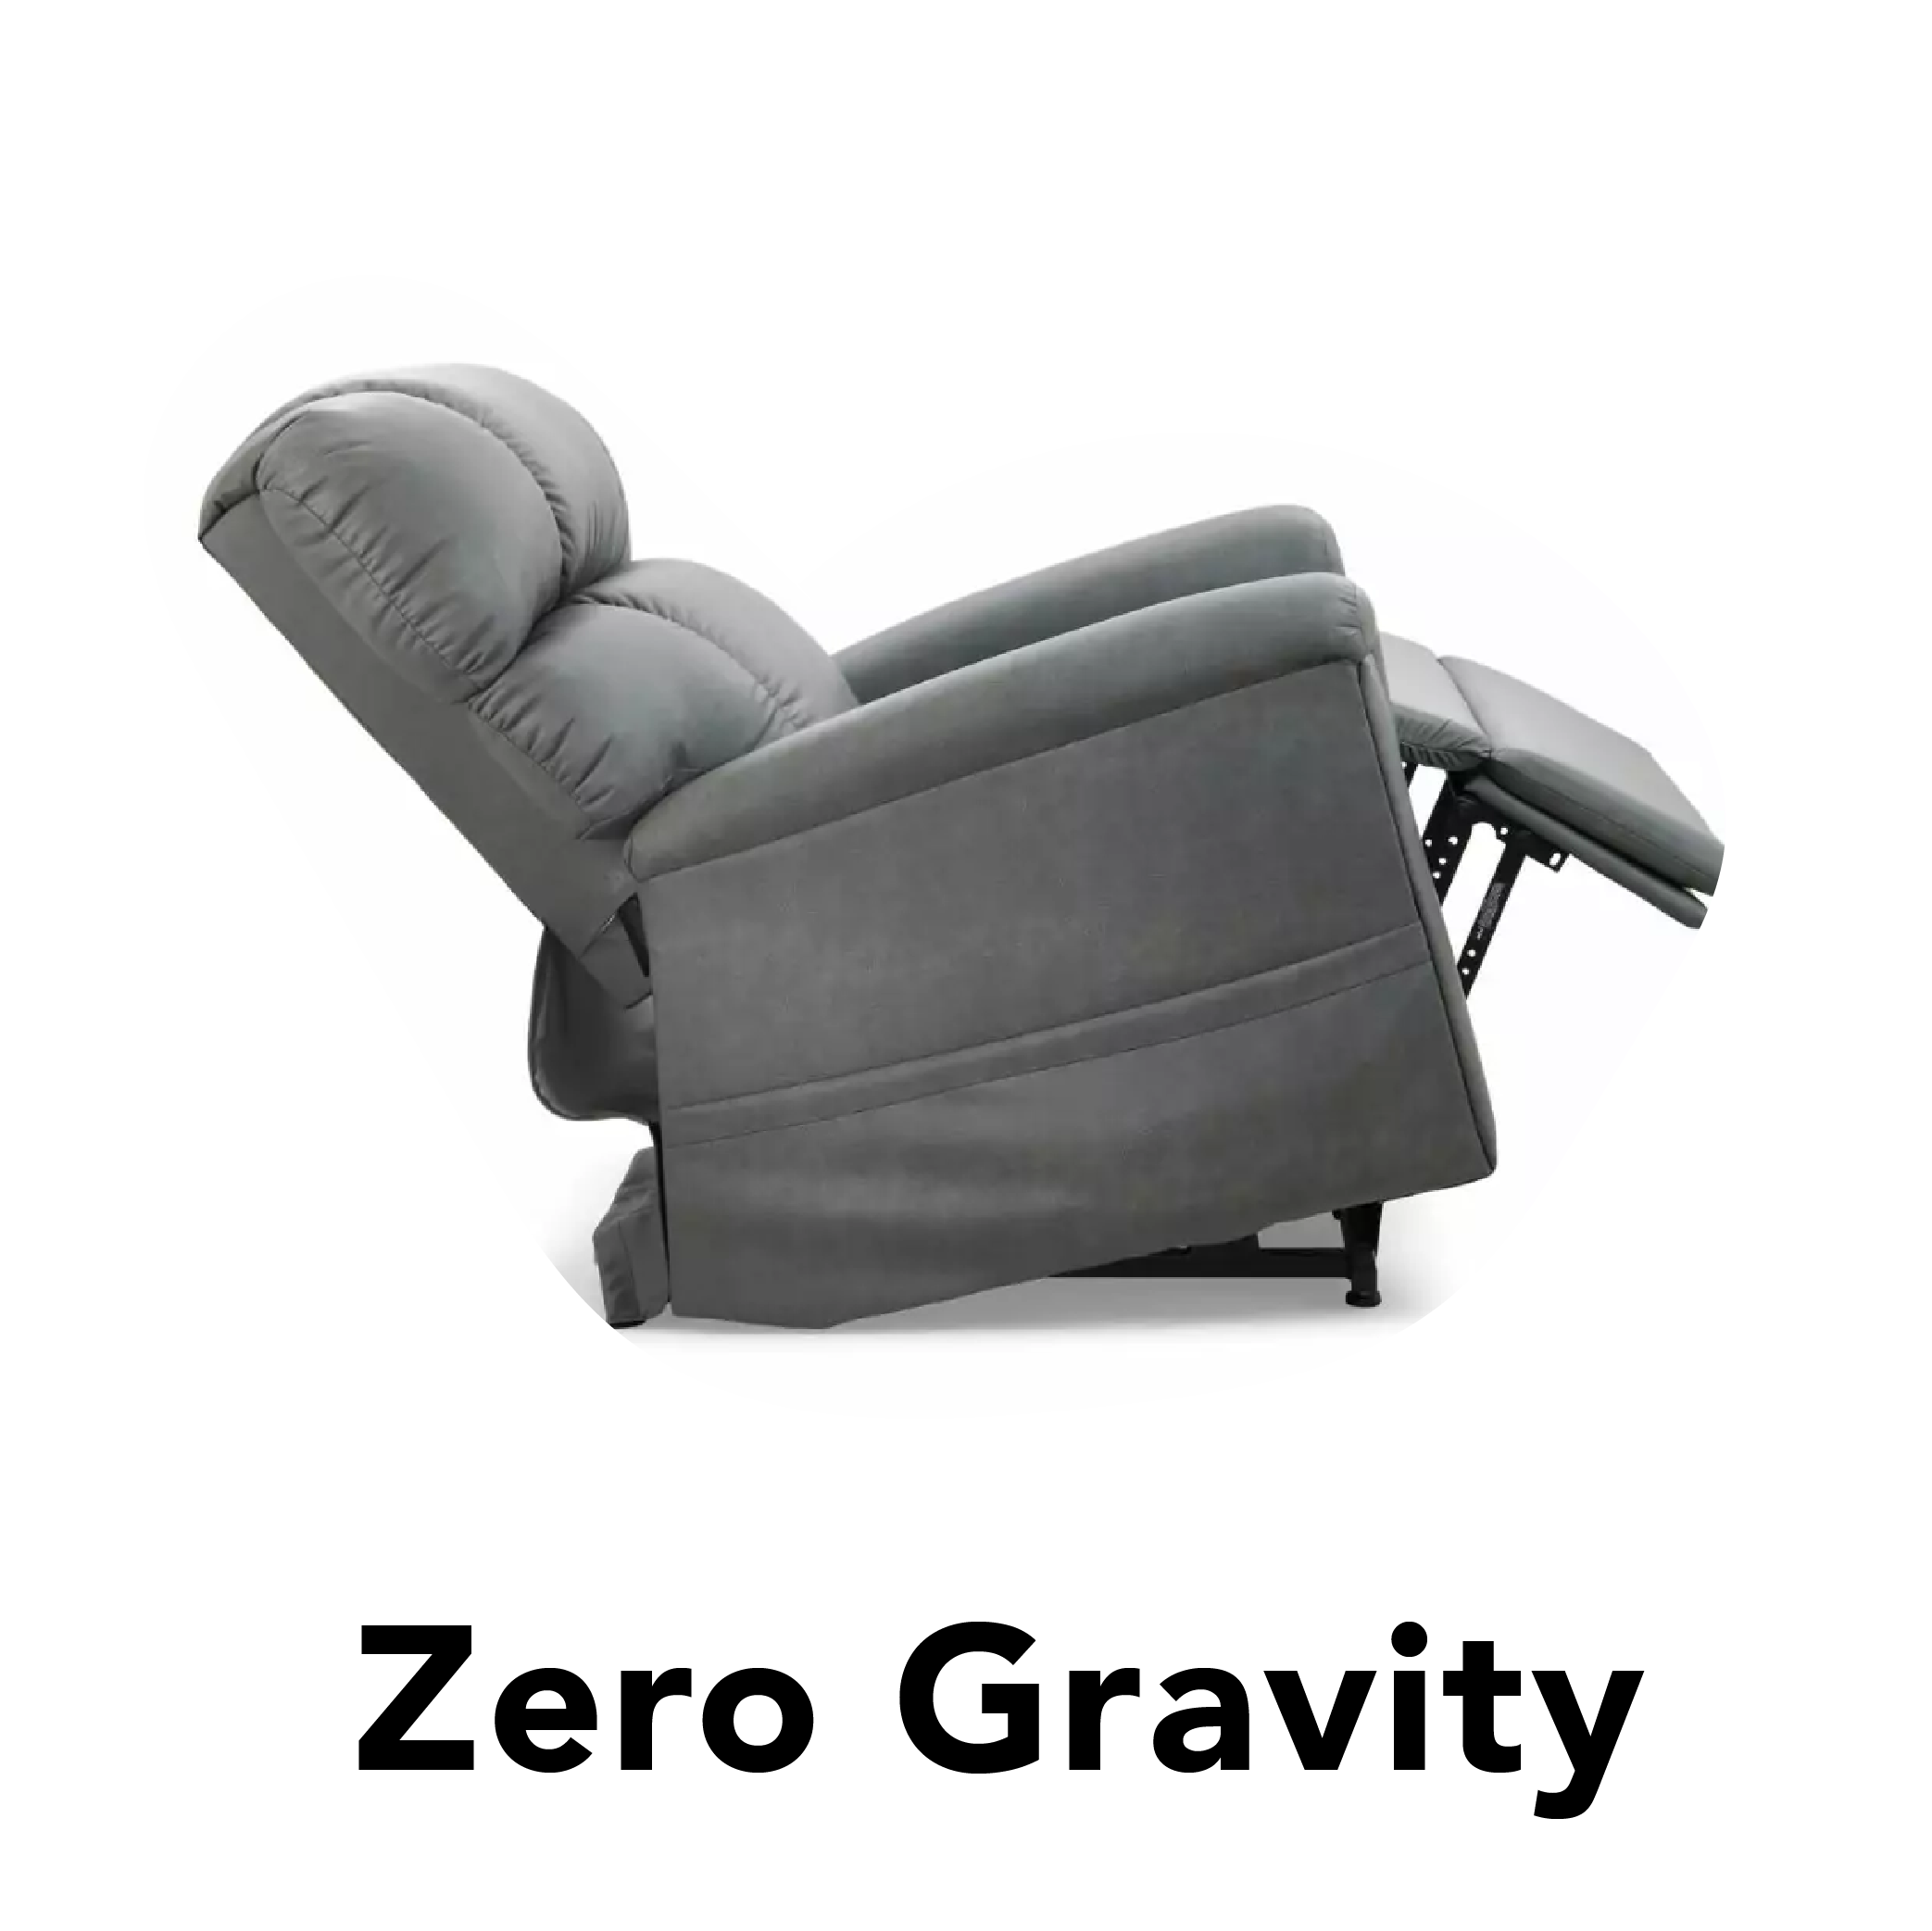 zero gravity position lift chairs category